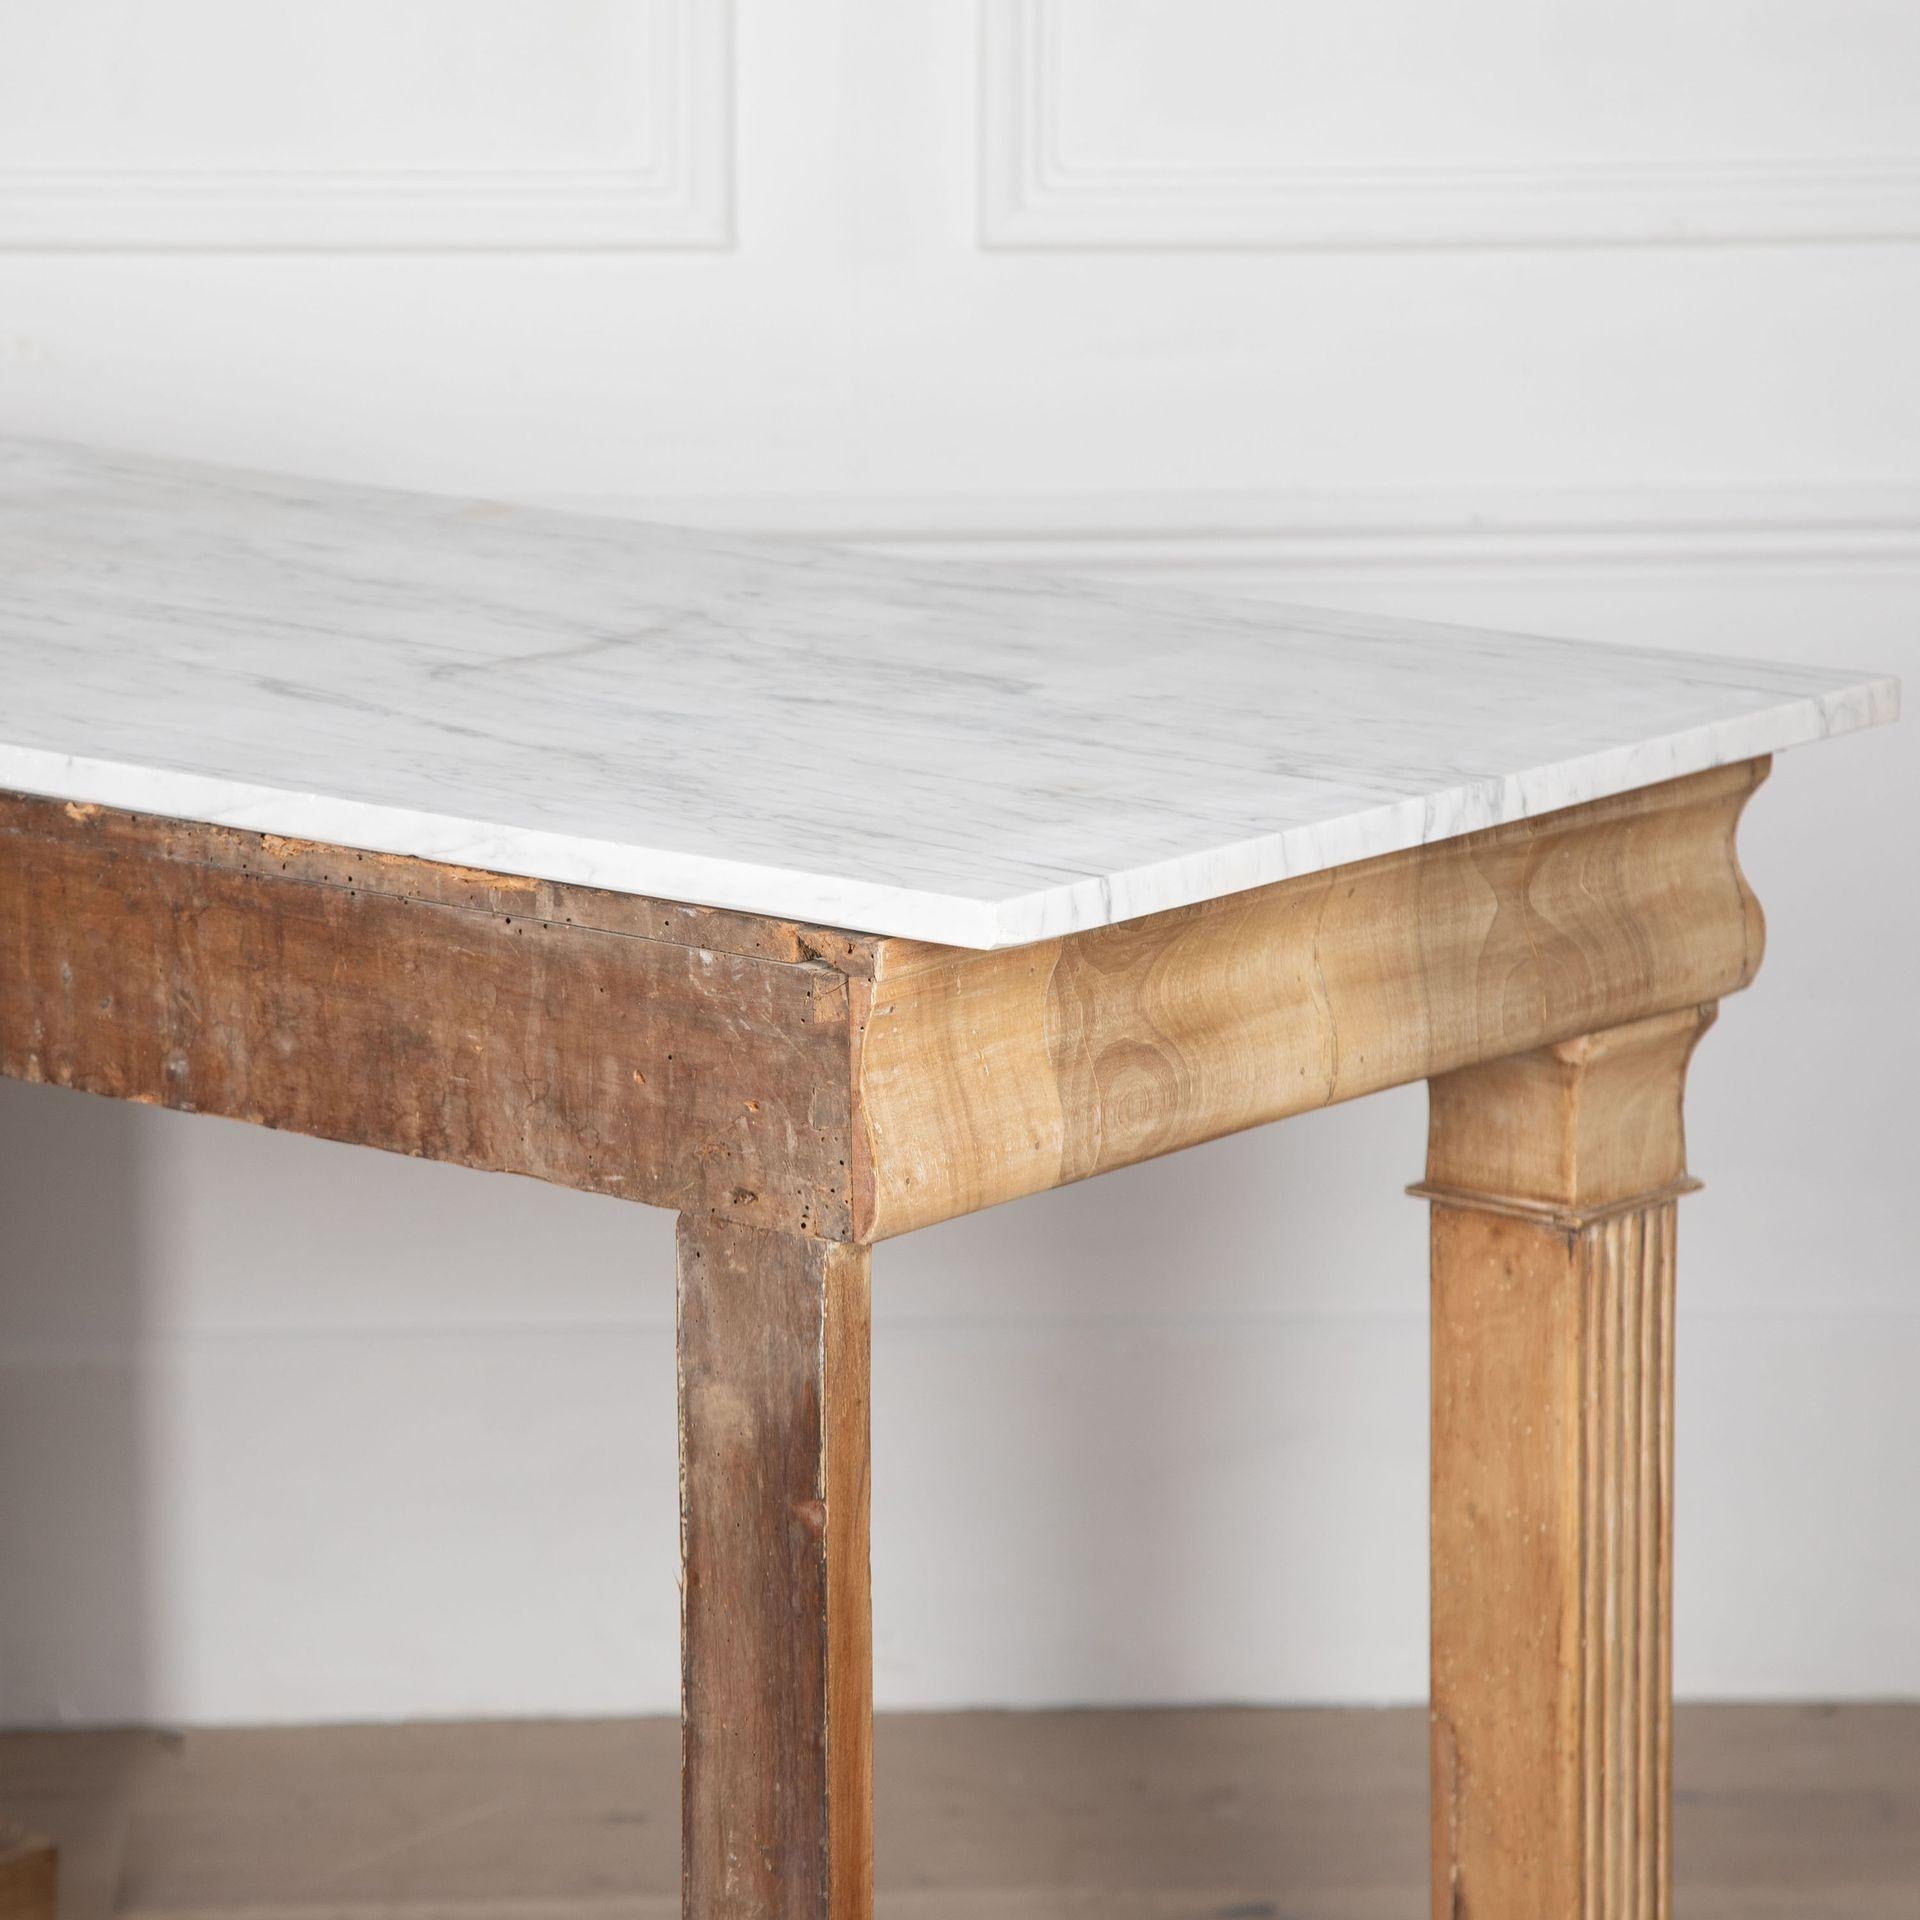 A fantastic early 19th Century Italian bleached walnut architectural console table with original Carrara marble top.